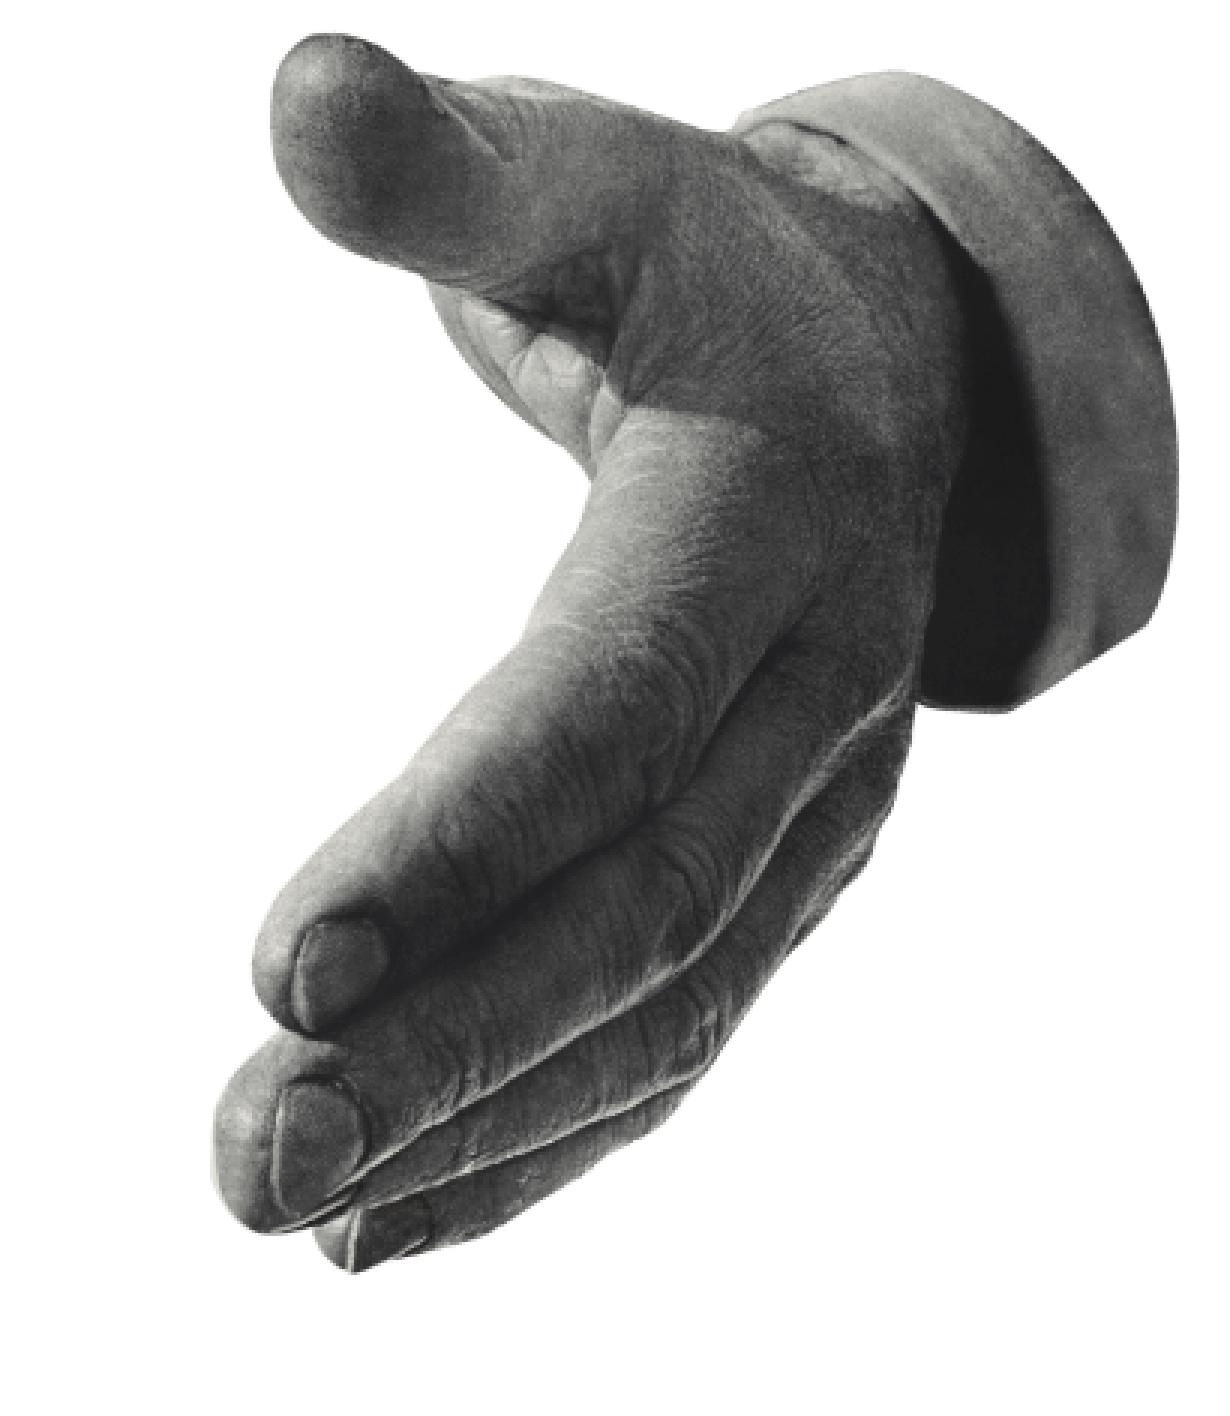 A black and white image of a person's hand